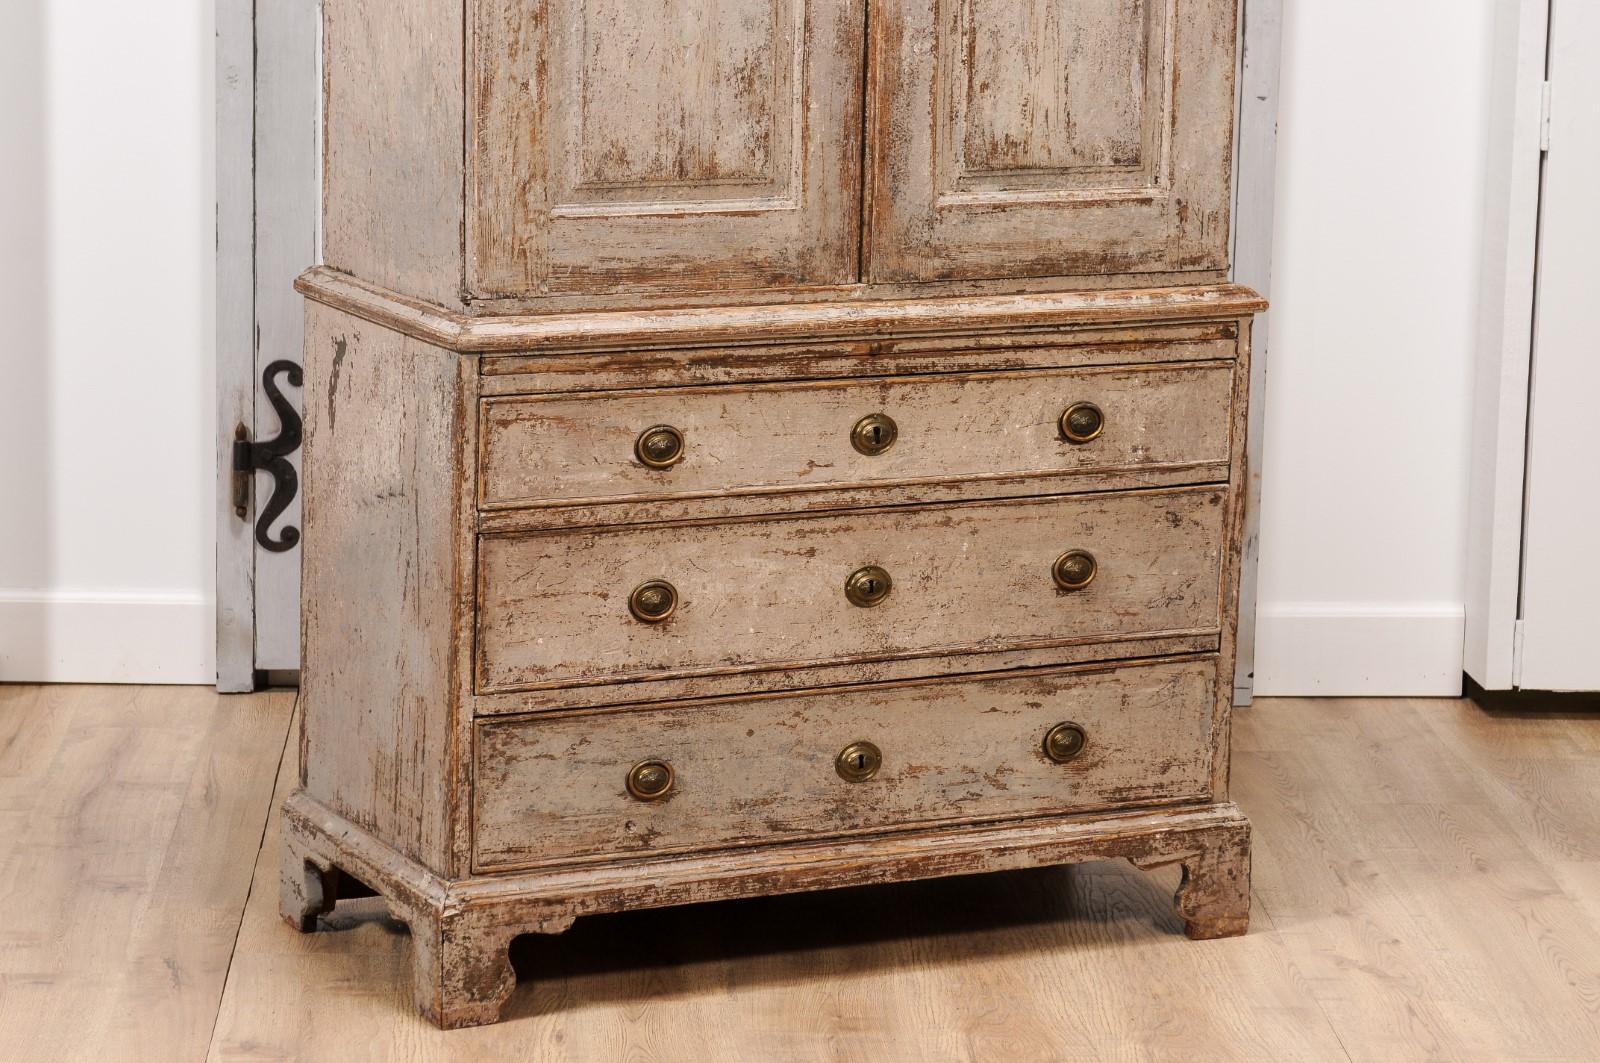 Carved Swedish Gustavian Period 1802 Painted Wood Cupboard with Doors and Drawers For Sale